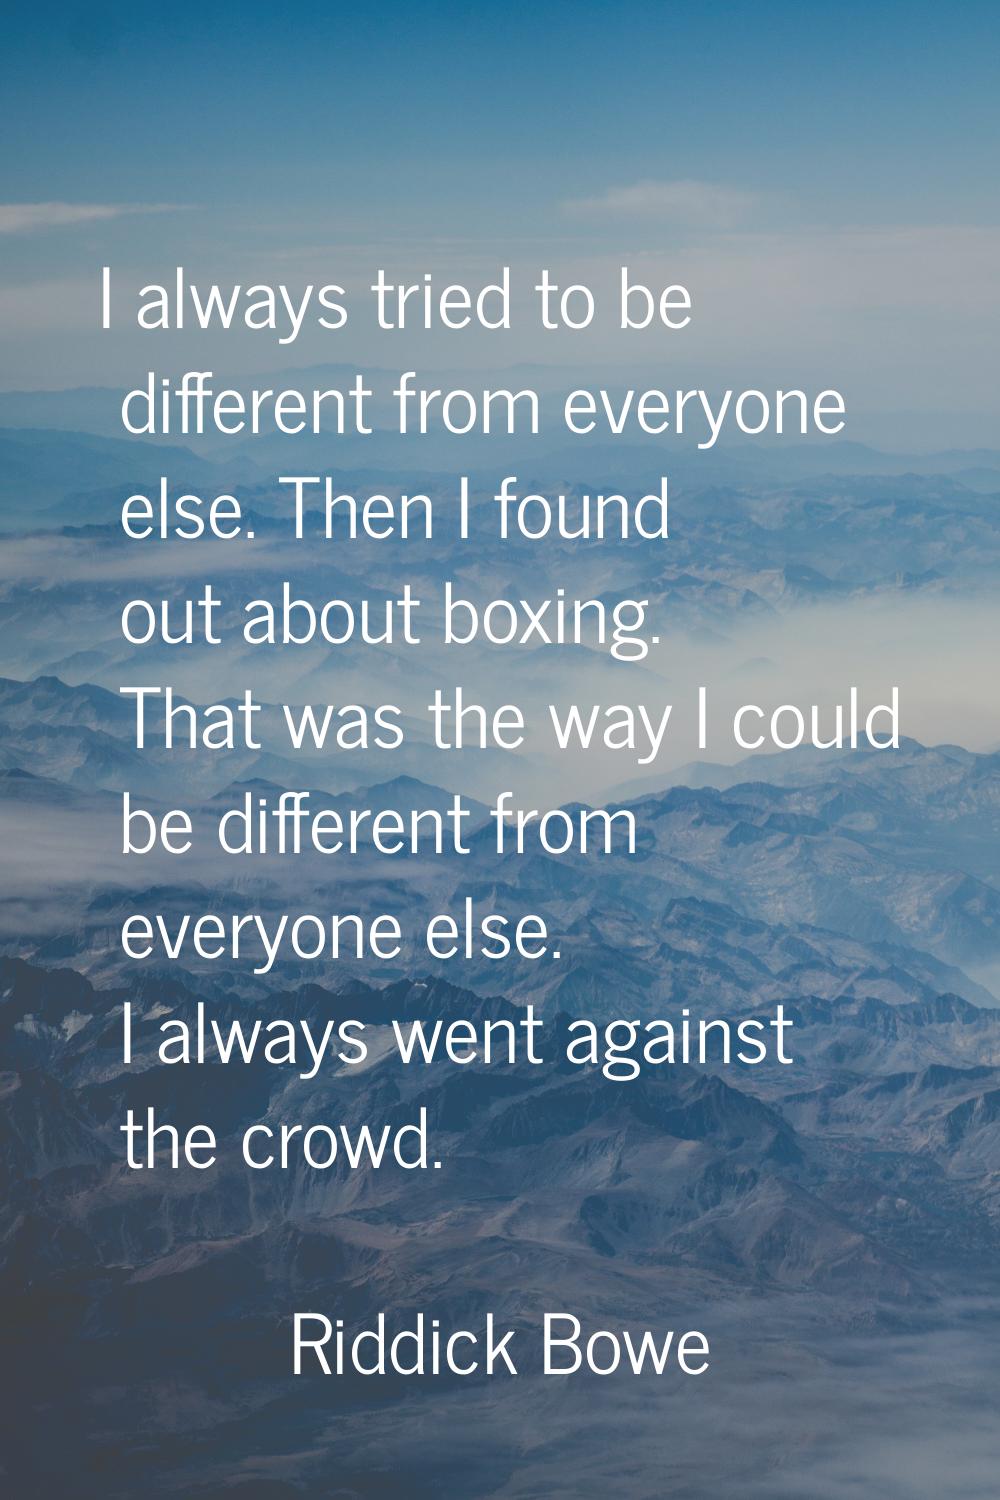 I always tried to be different from everyone else. Then I found out about boxing. That was the way 